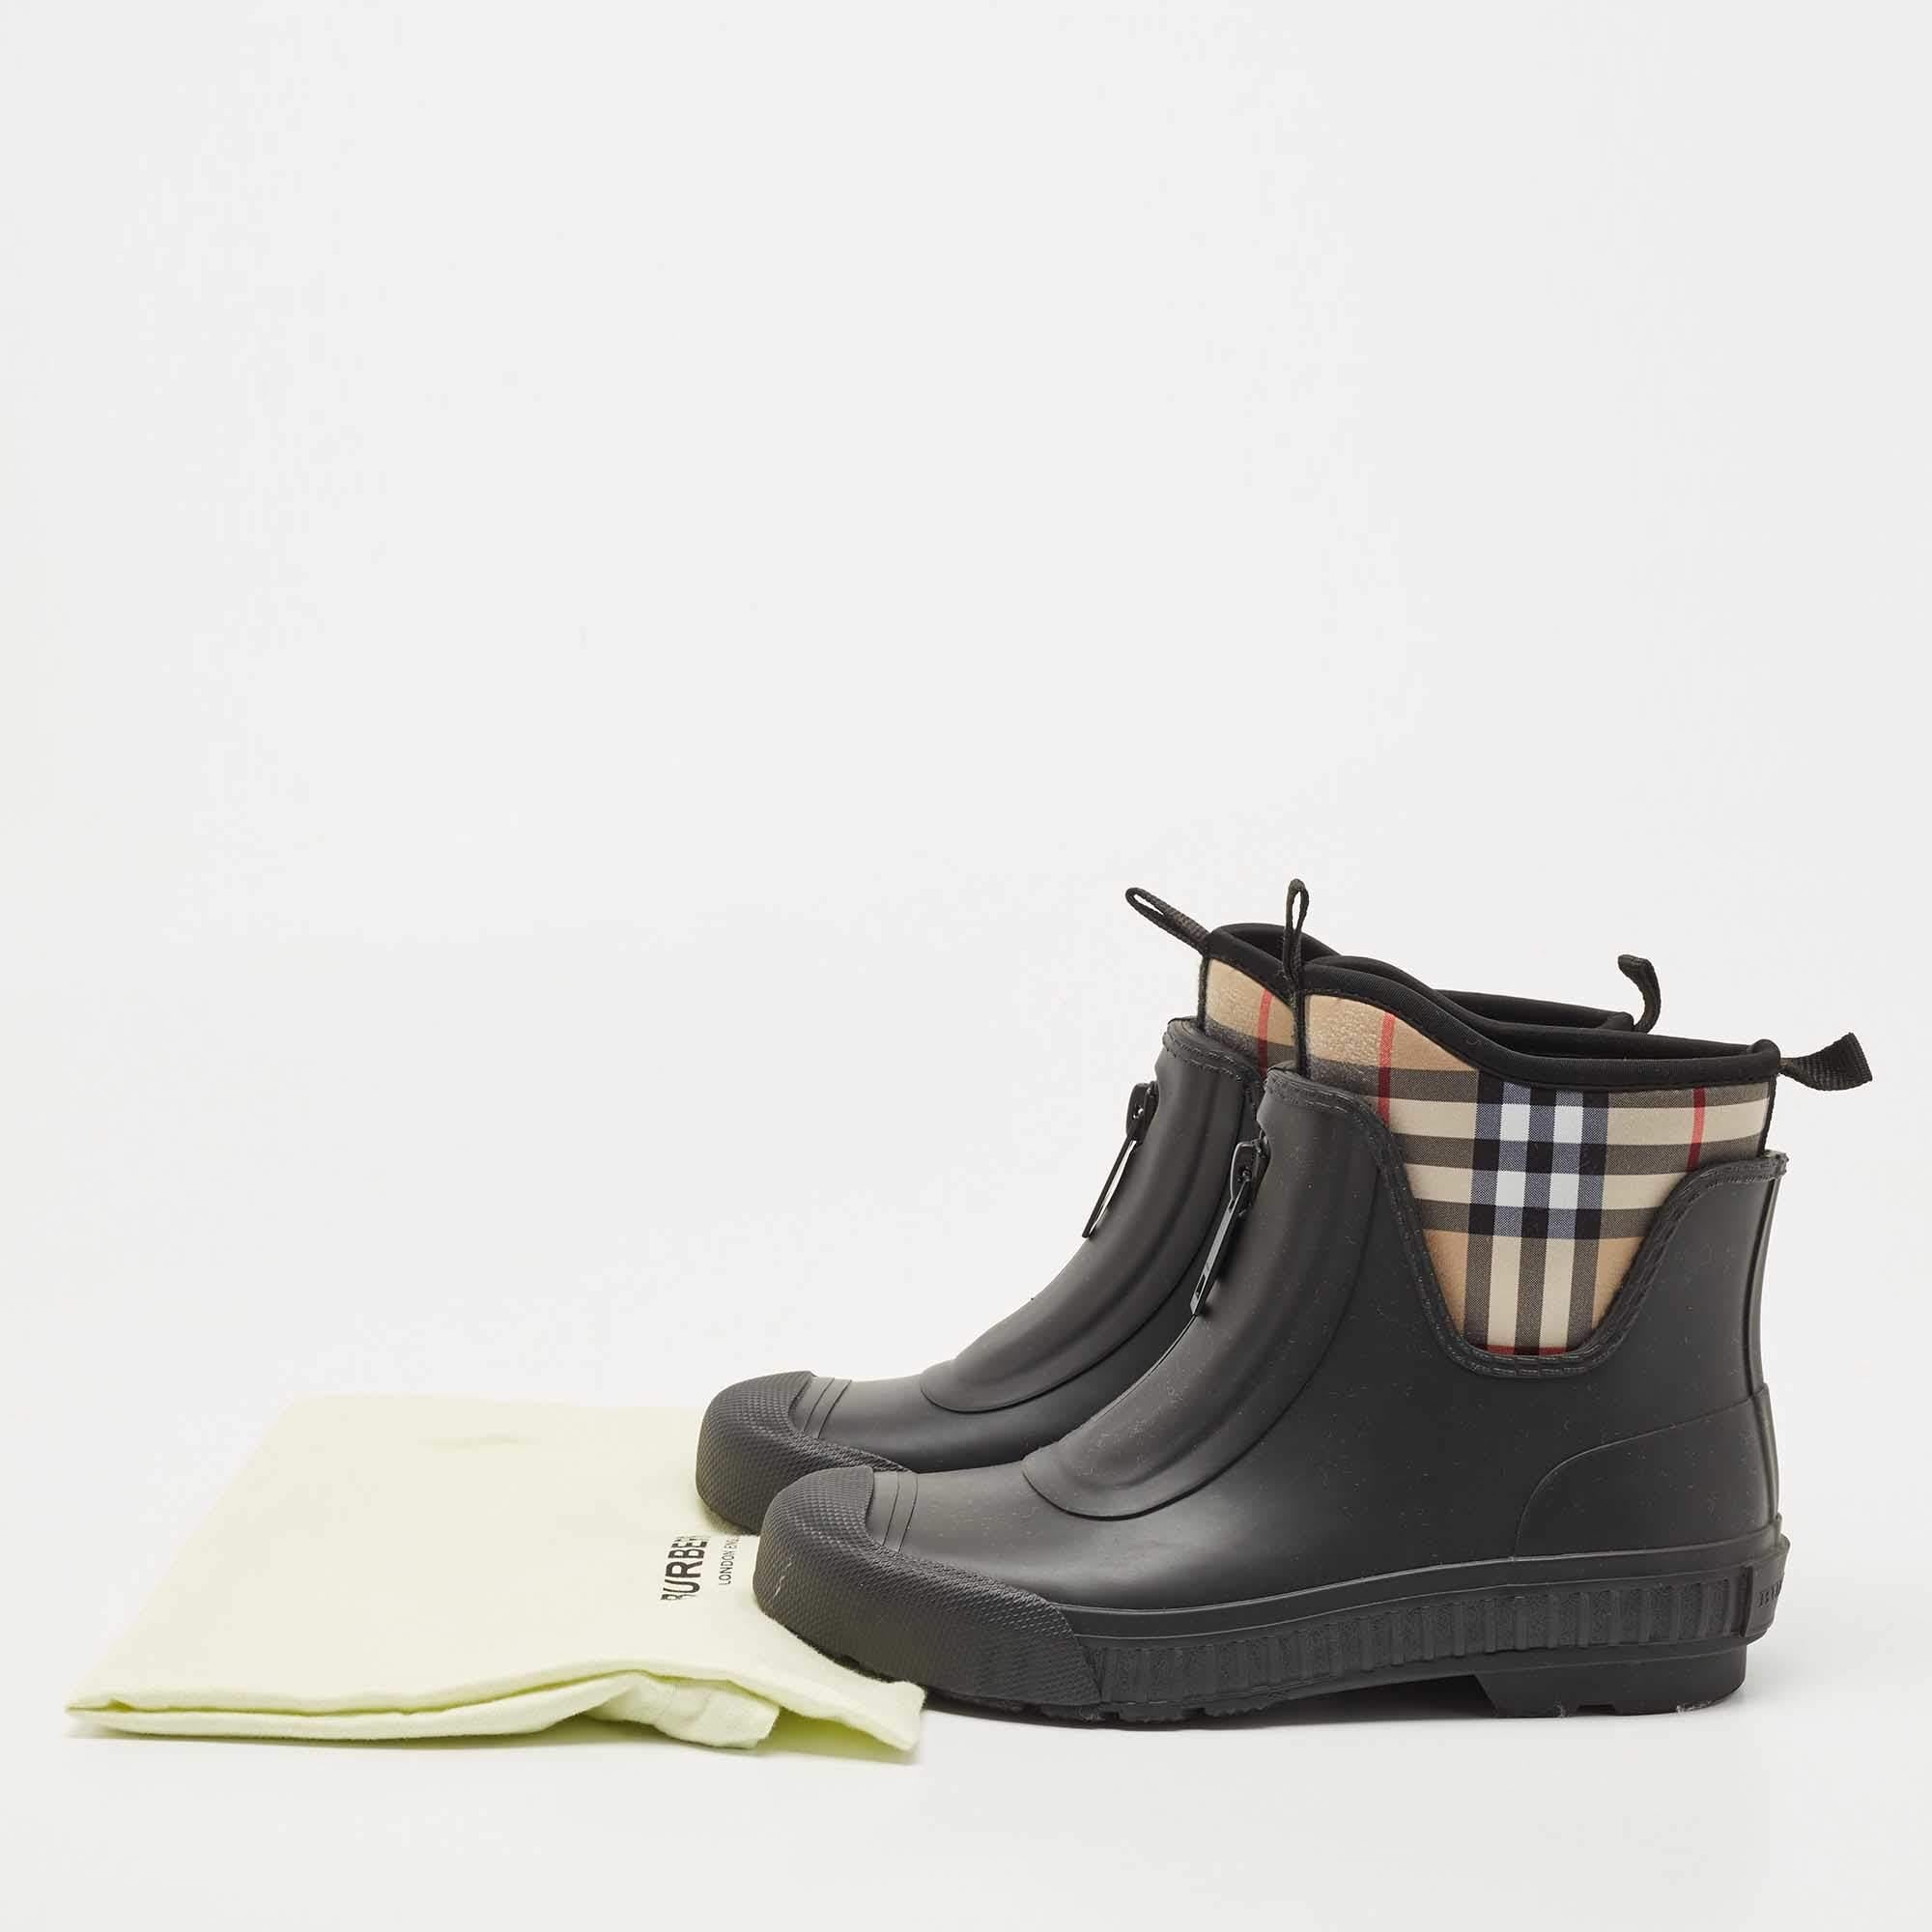 Burberry Black Rubber and Vintage Check Neoprene Rain Boots Size 37 4